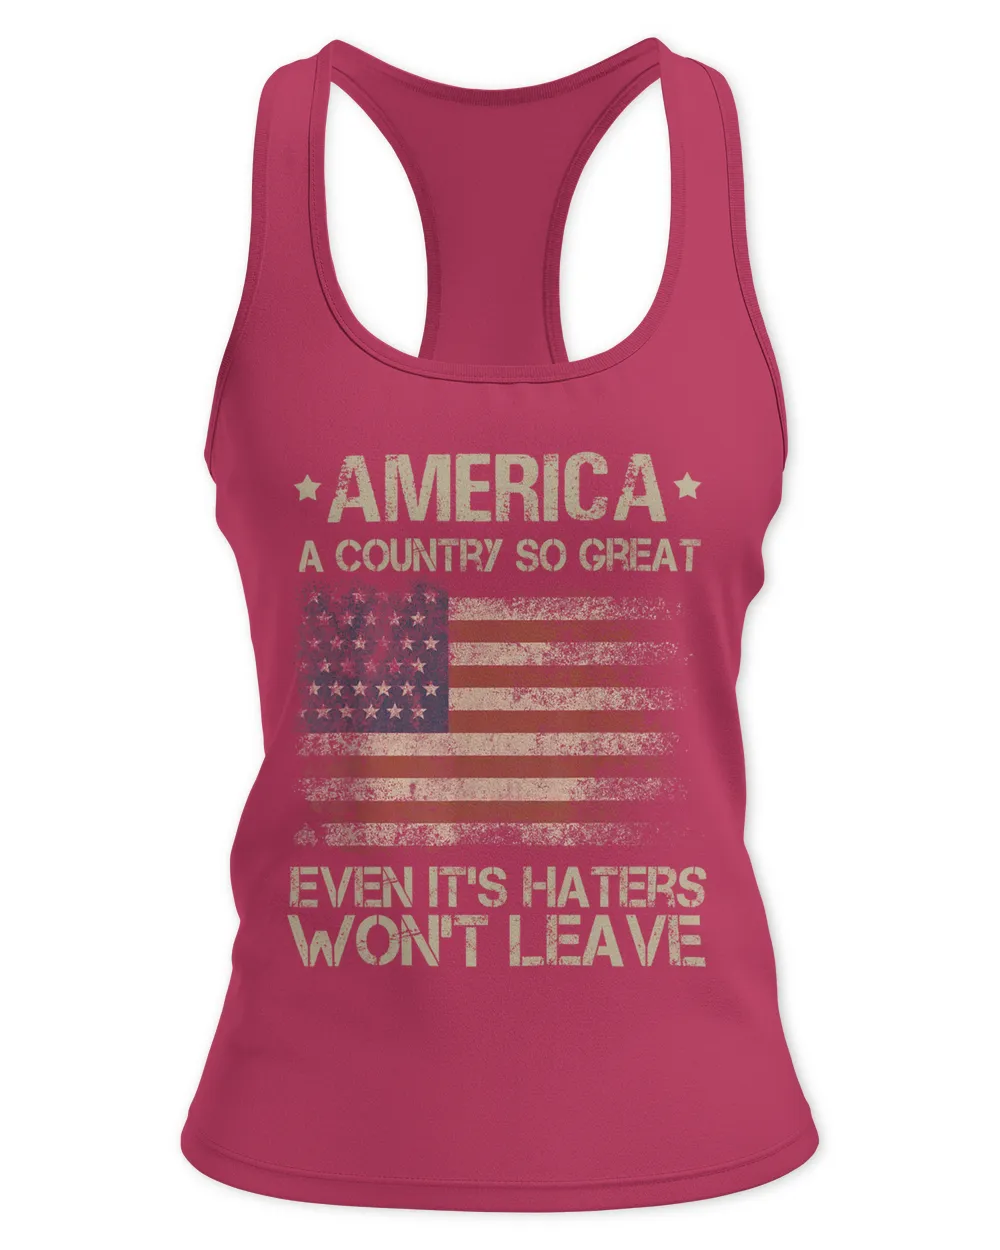 America a country so great even it's Haters won't leave